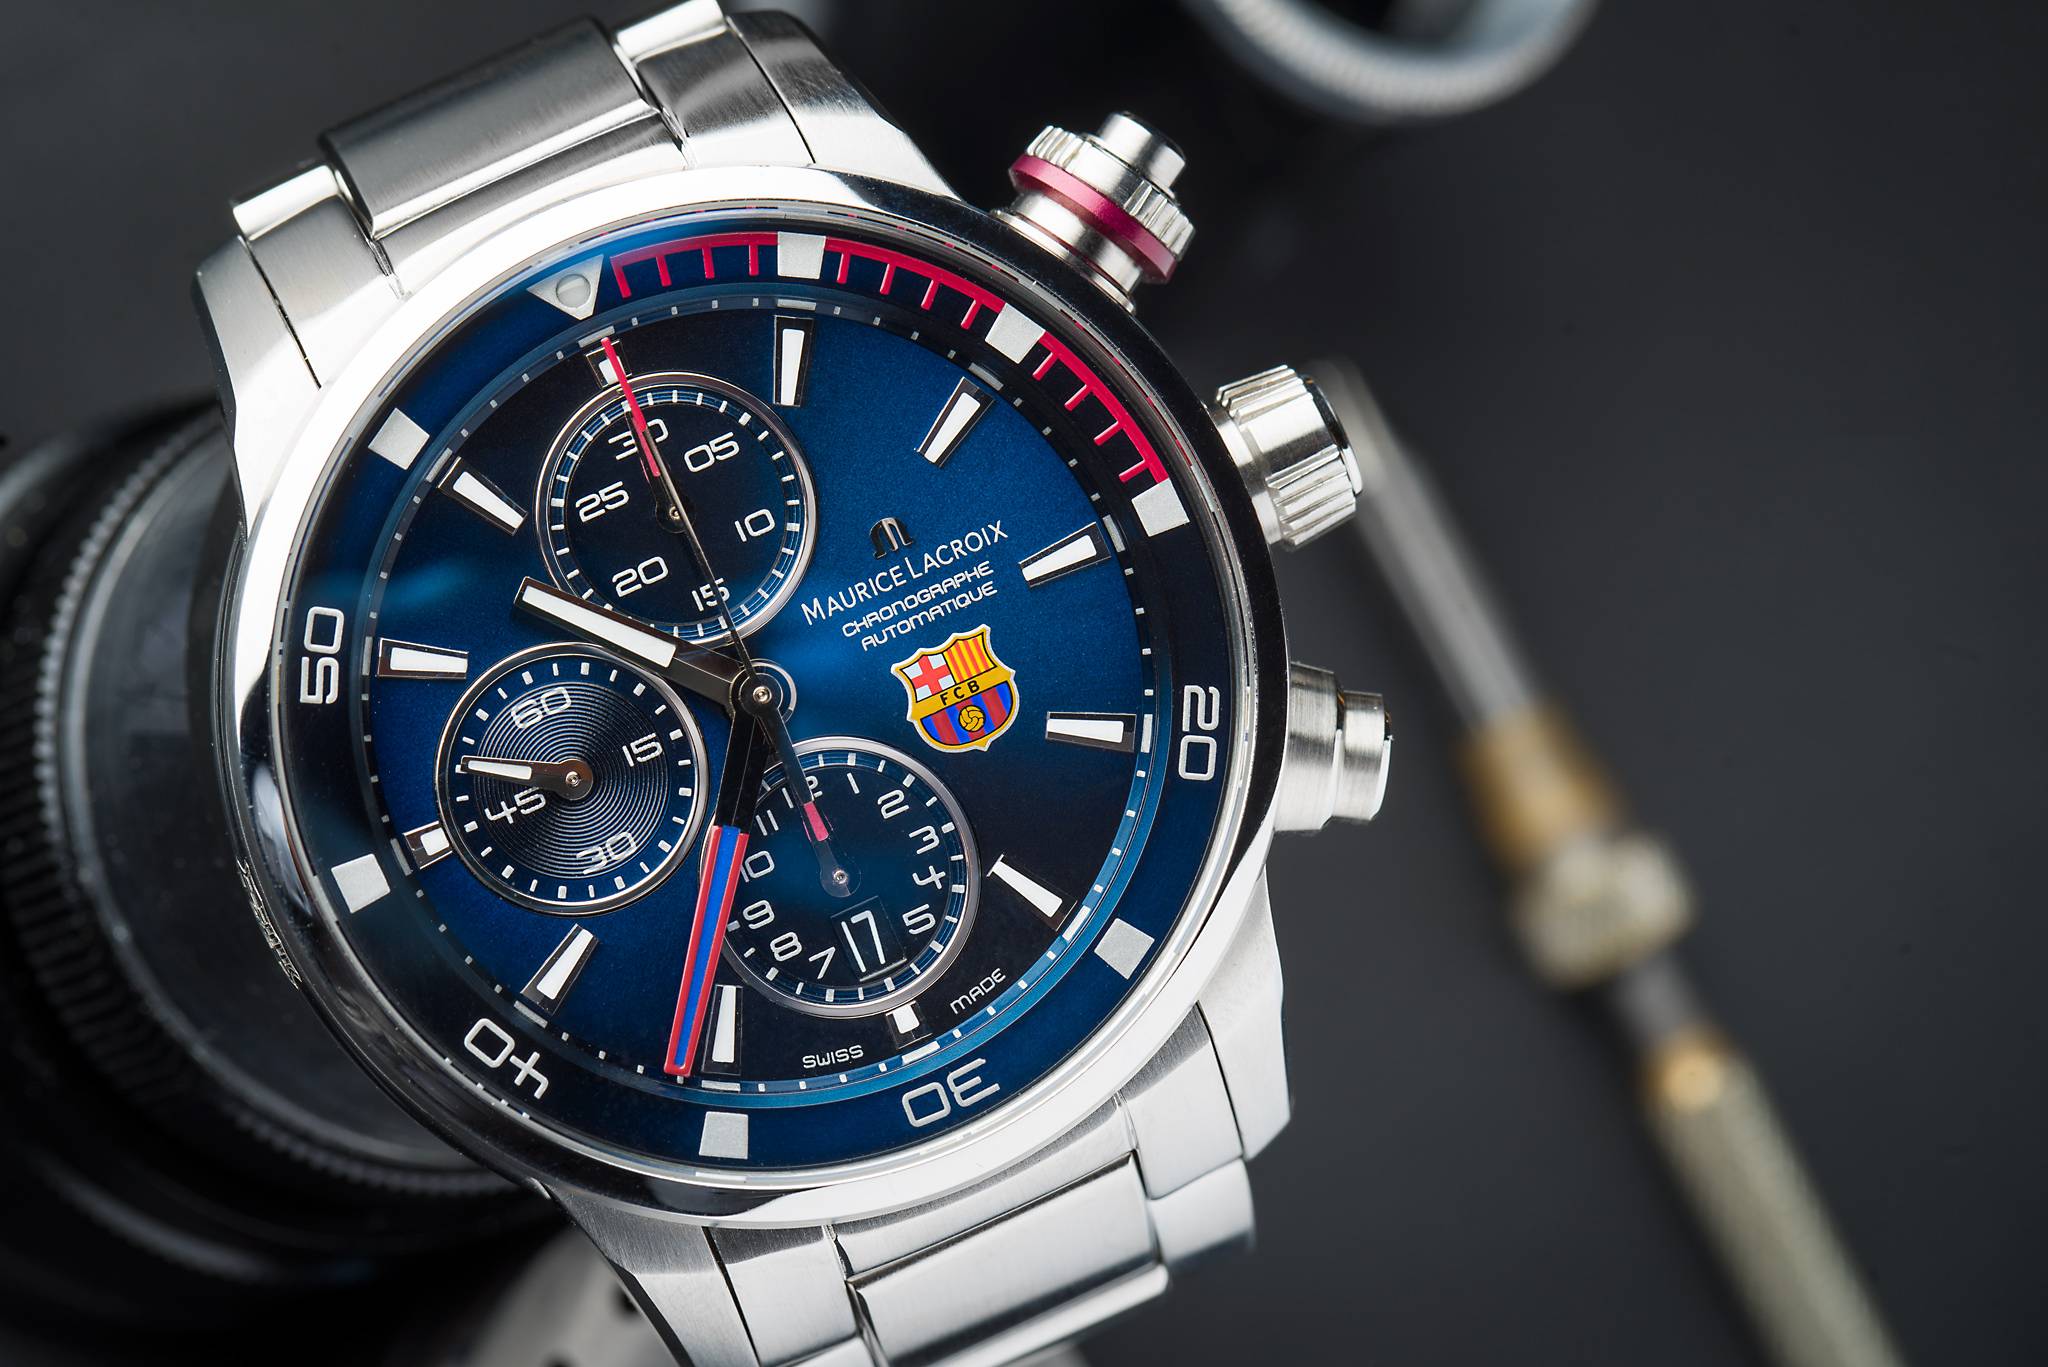 Hands On The Maurice Lacroix Pontos S FC Barcelona Watch, A Limited Edition Made For Fans